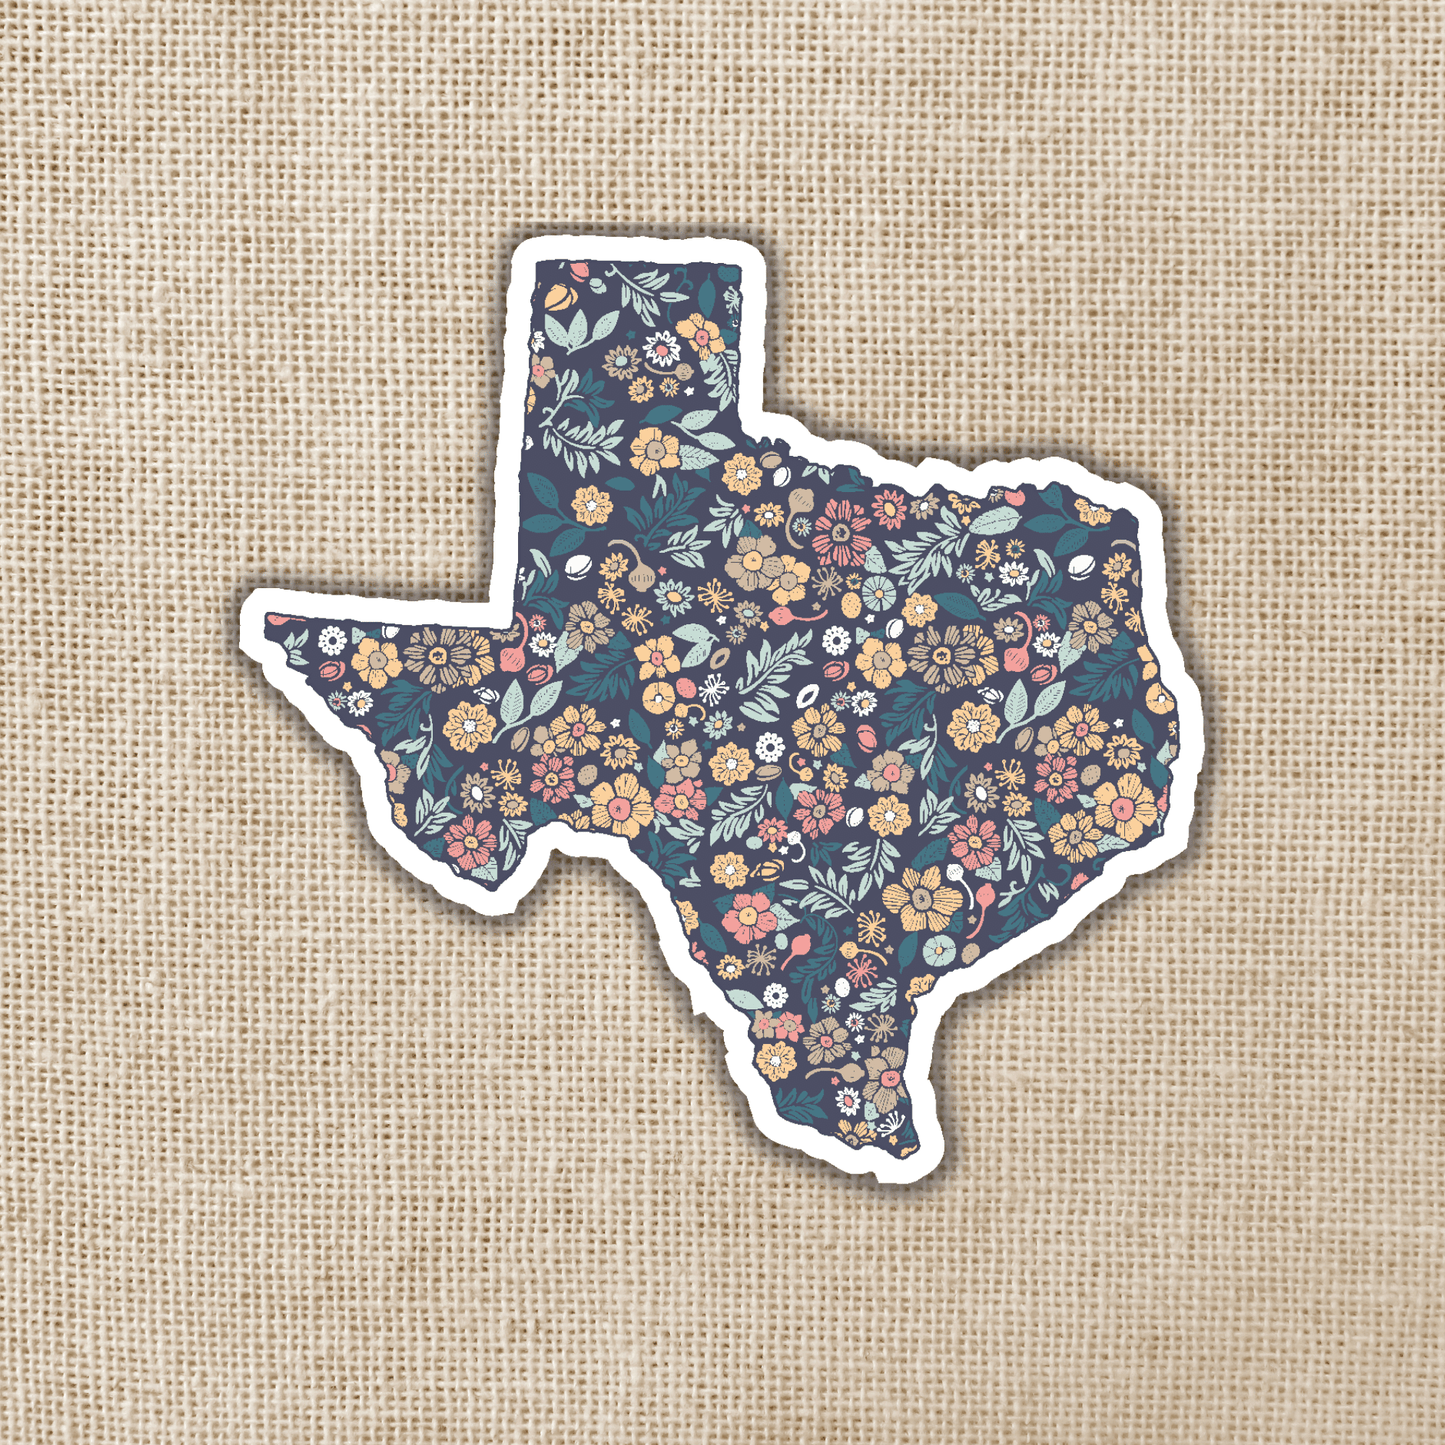 Wildly Enough - Texas Floral State Sticker